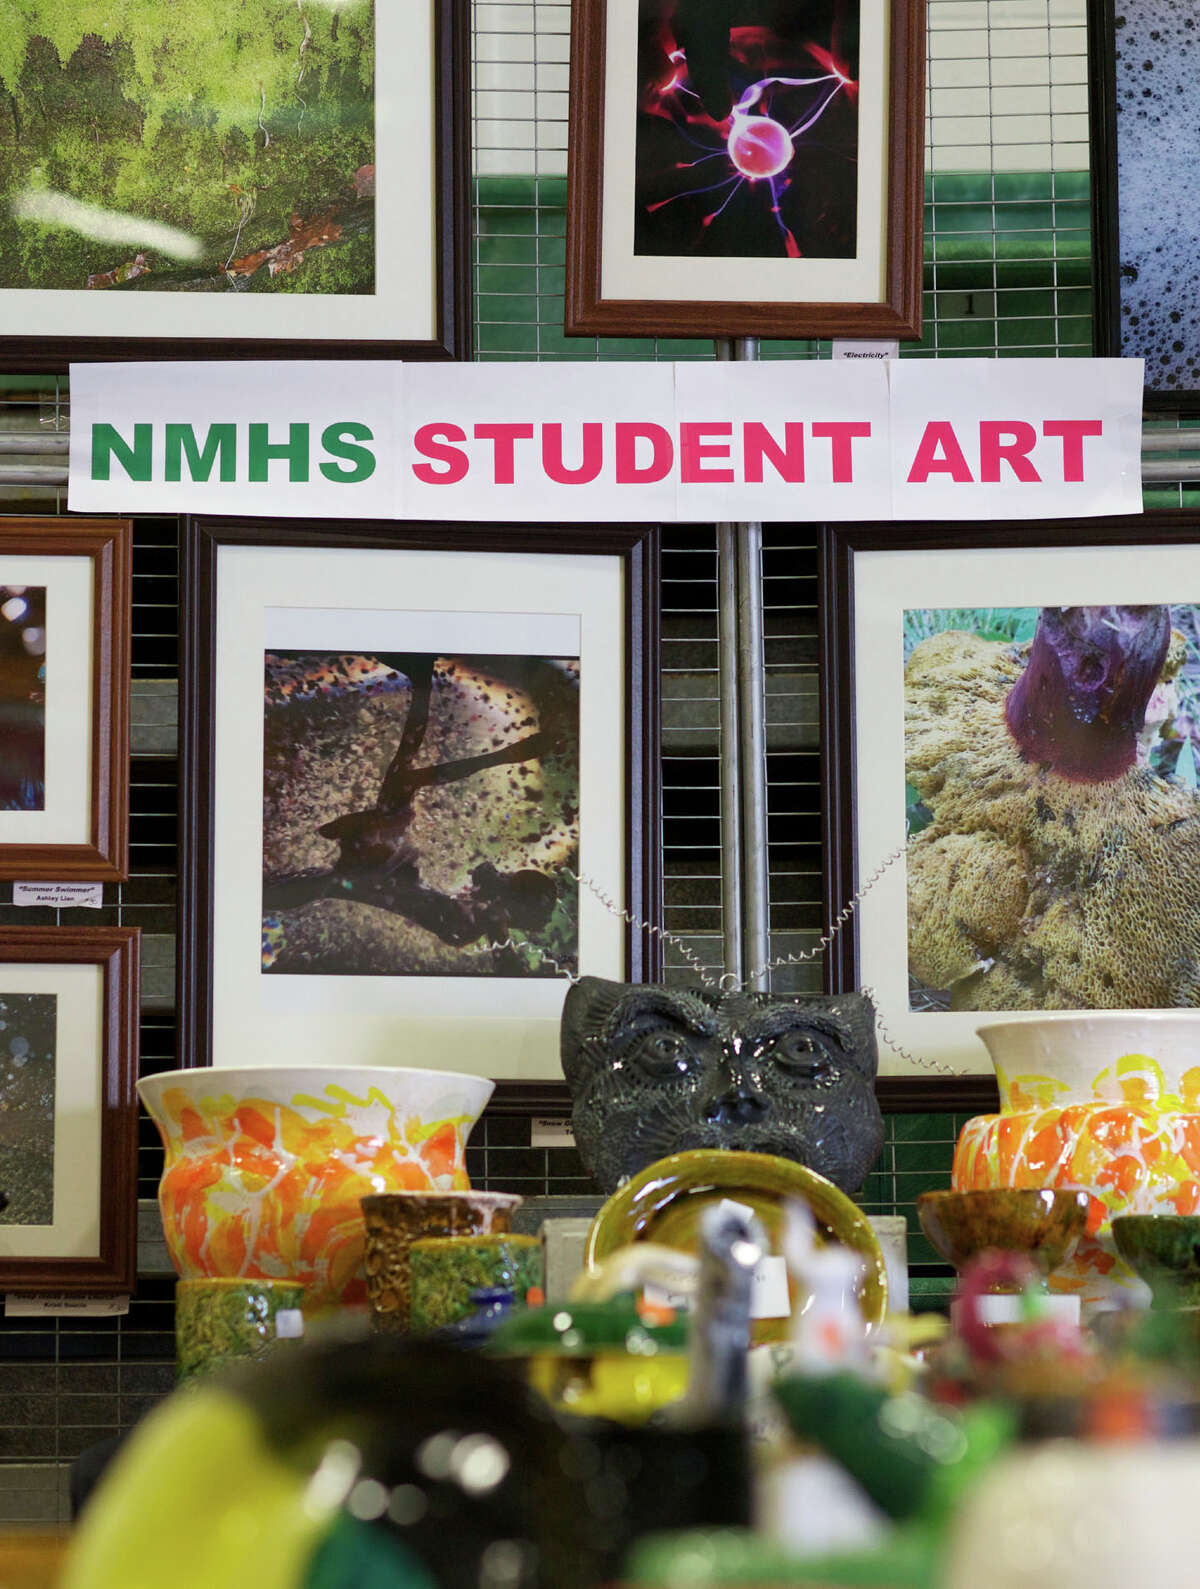 Artwork created by New Milford High School students was among the featured items for sale during the Future Business Leaders of America's New Milford Spring Fair Days at NMHS. April 27 2013